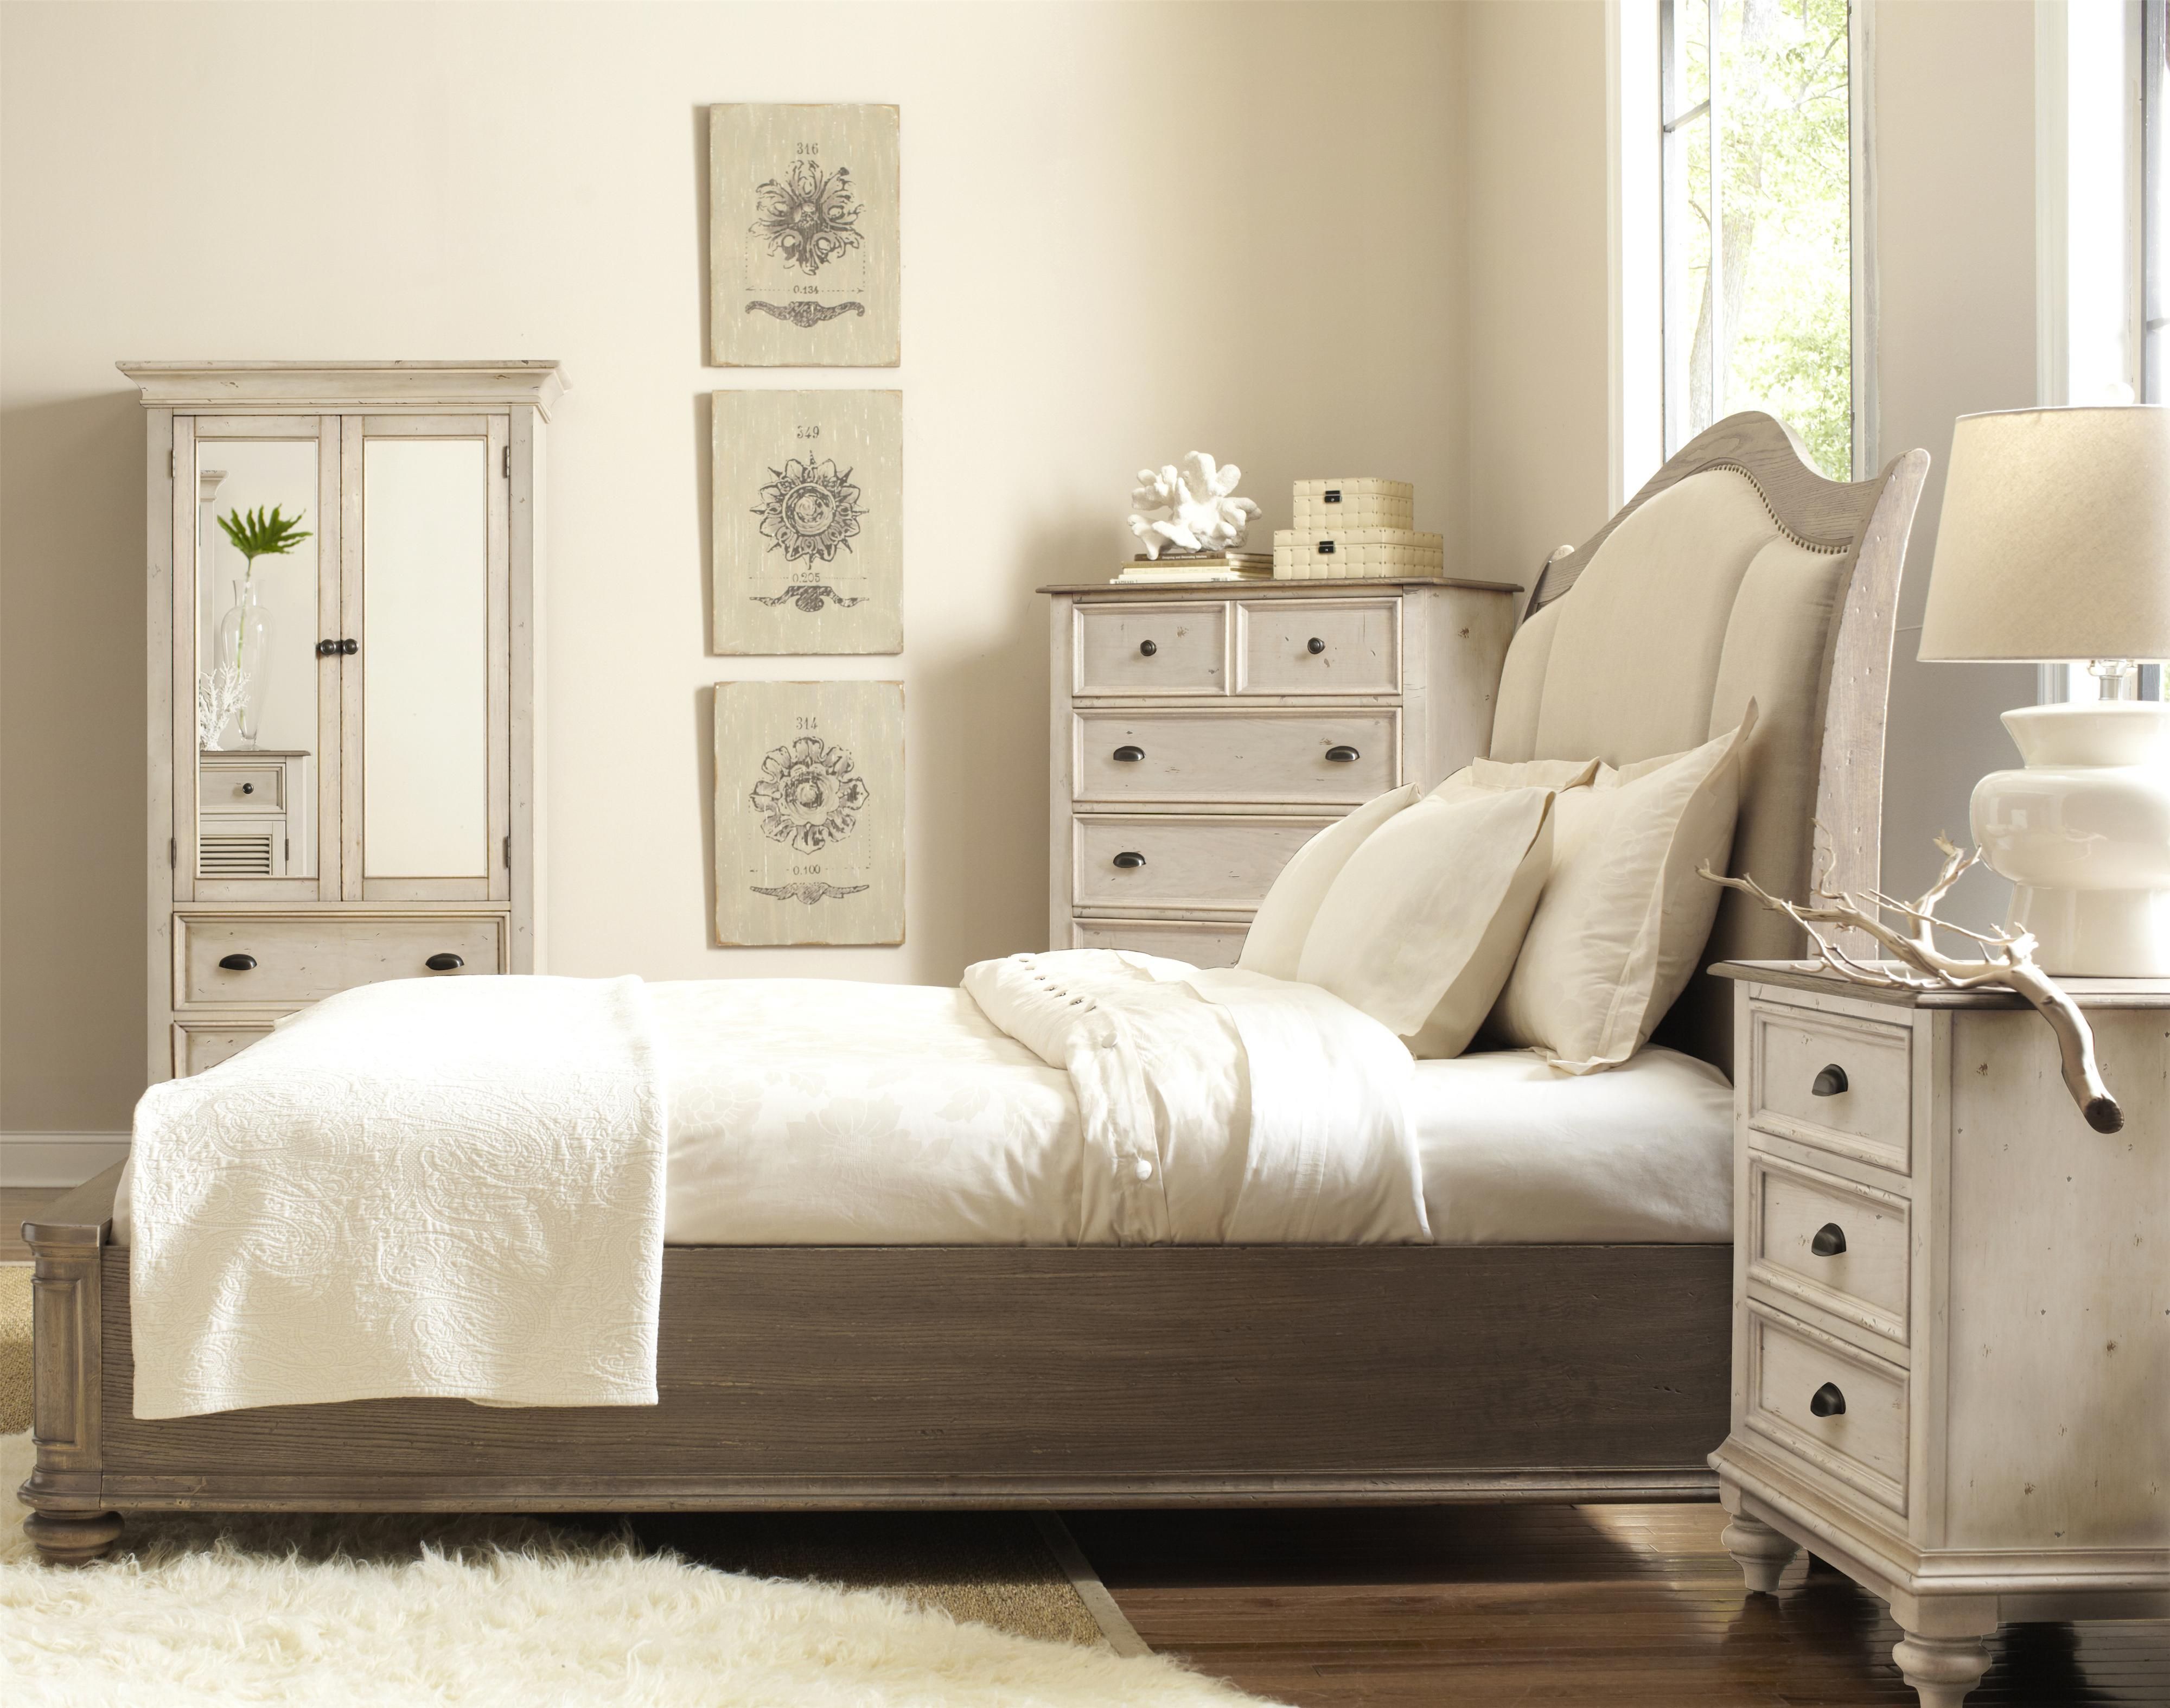 What To Consider When Choosing Bedroom Furniture: A Comprehensive Guide